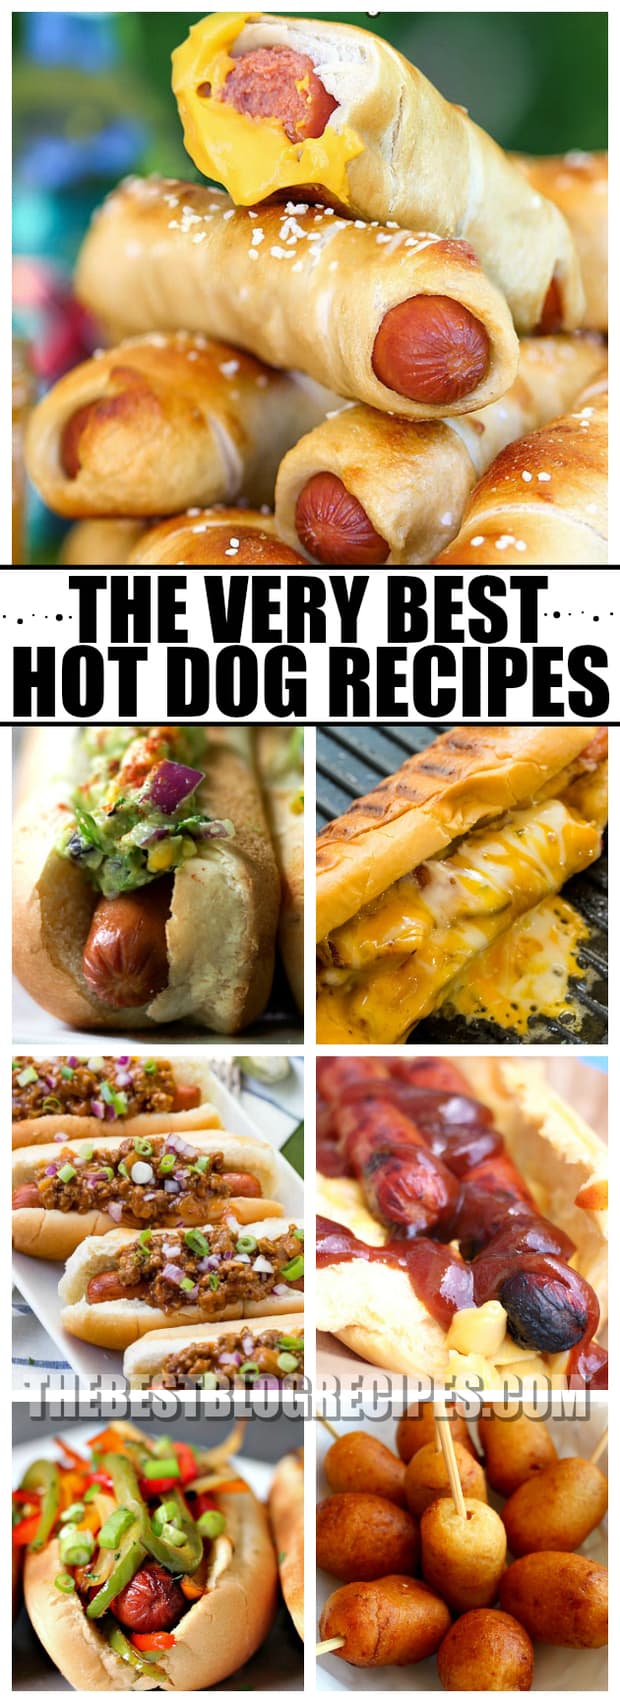 Who doesn't love hot dogs? They are an American classic, which is why we are sharing with you The Best Hot Dog Recipes! These recipes are perfect for a BBQ, weeknight dinner, or game day meal! You won't be able to get enough!